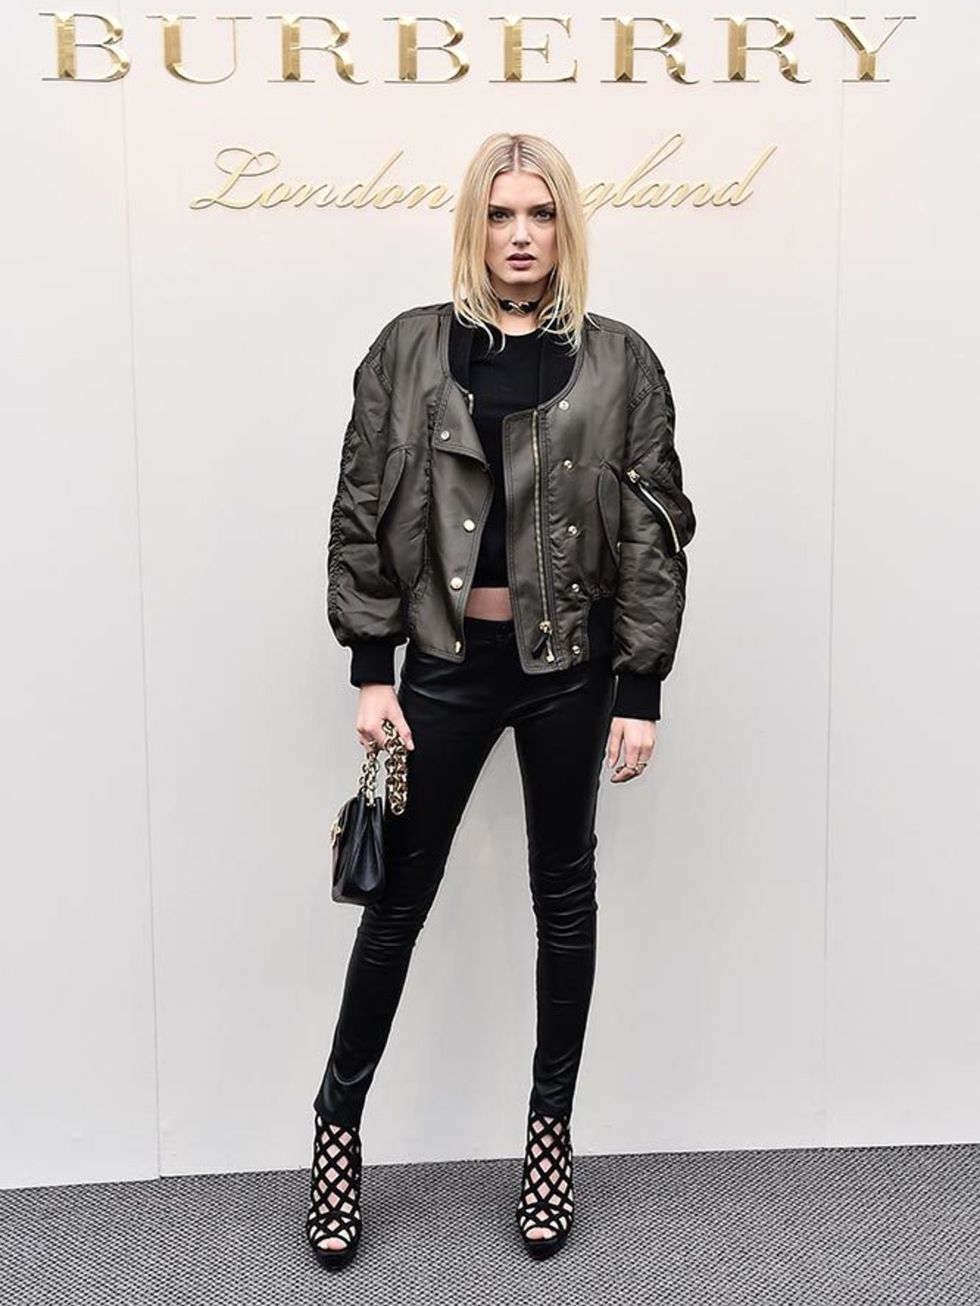 Lily Donaldson at the Burberry AW16 show during London Fashion Week, February 2016.